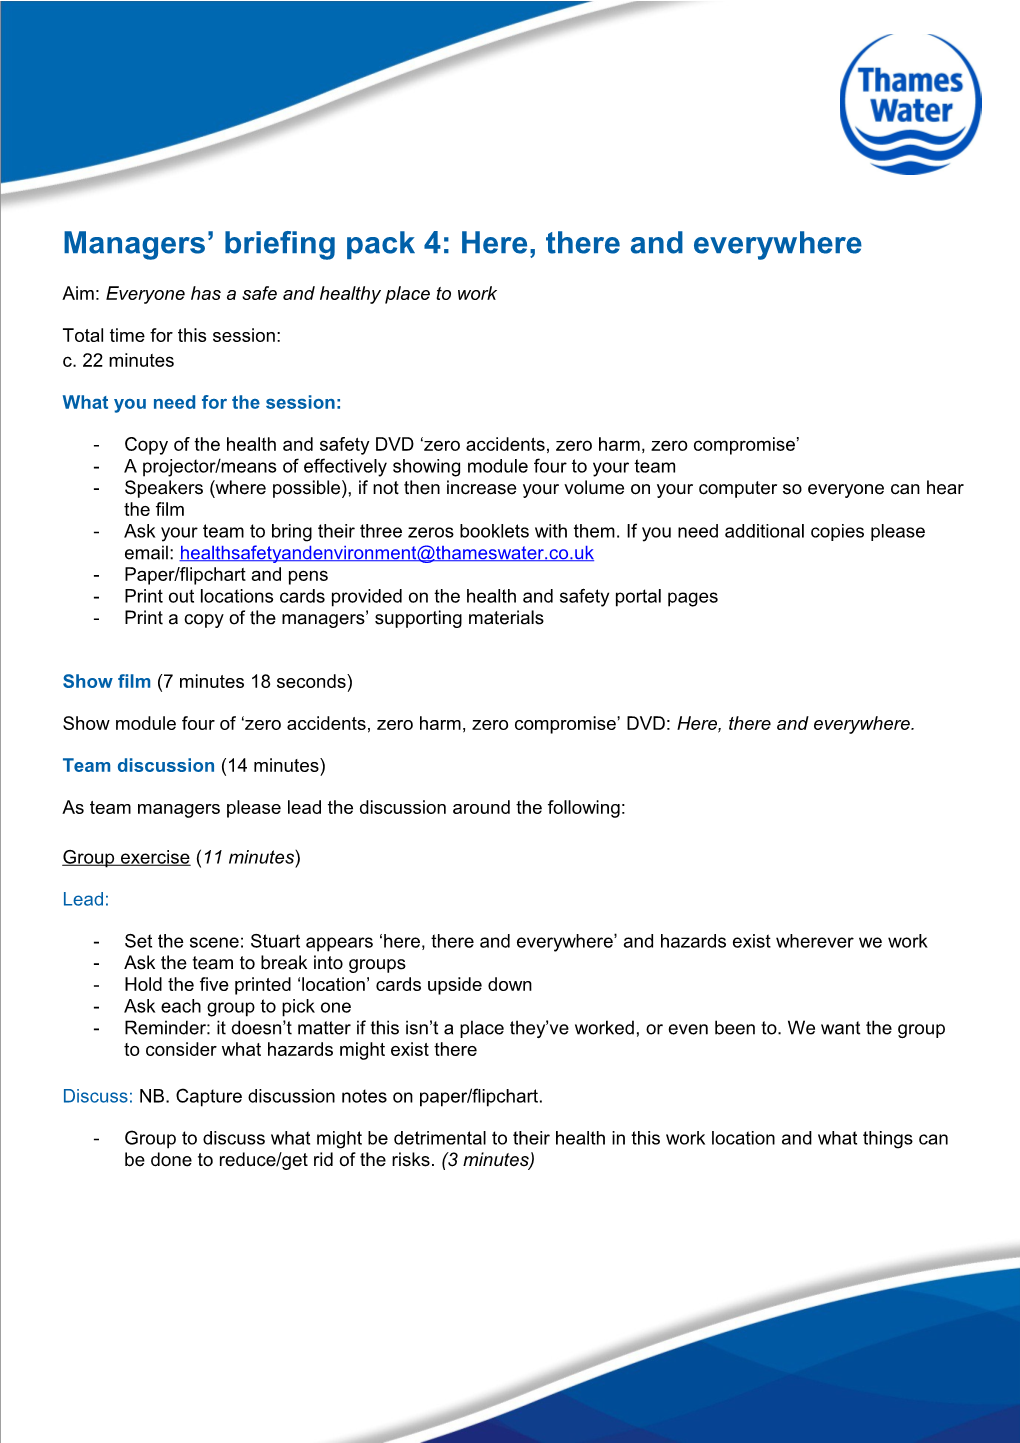 Managers Briefing Pack 4: Here, There and Everywhere